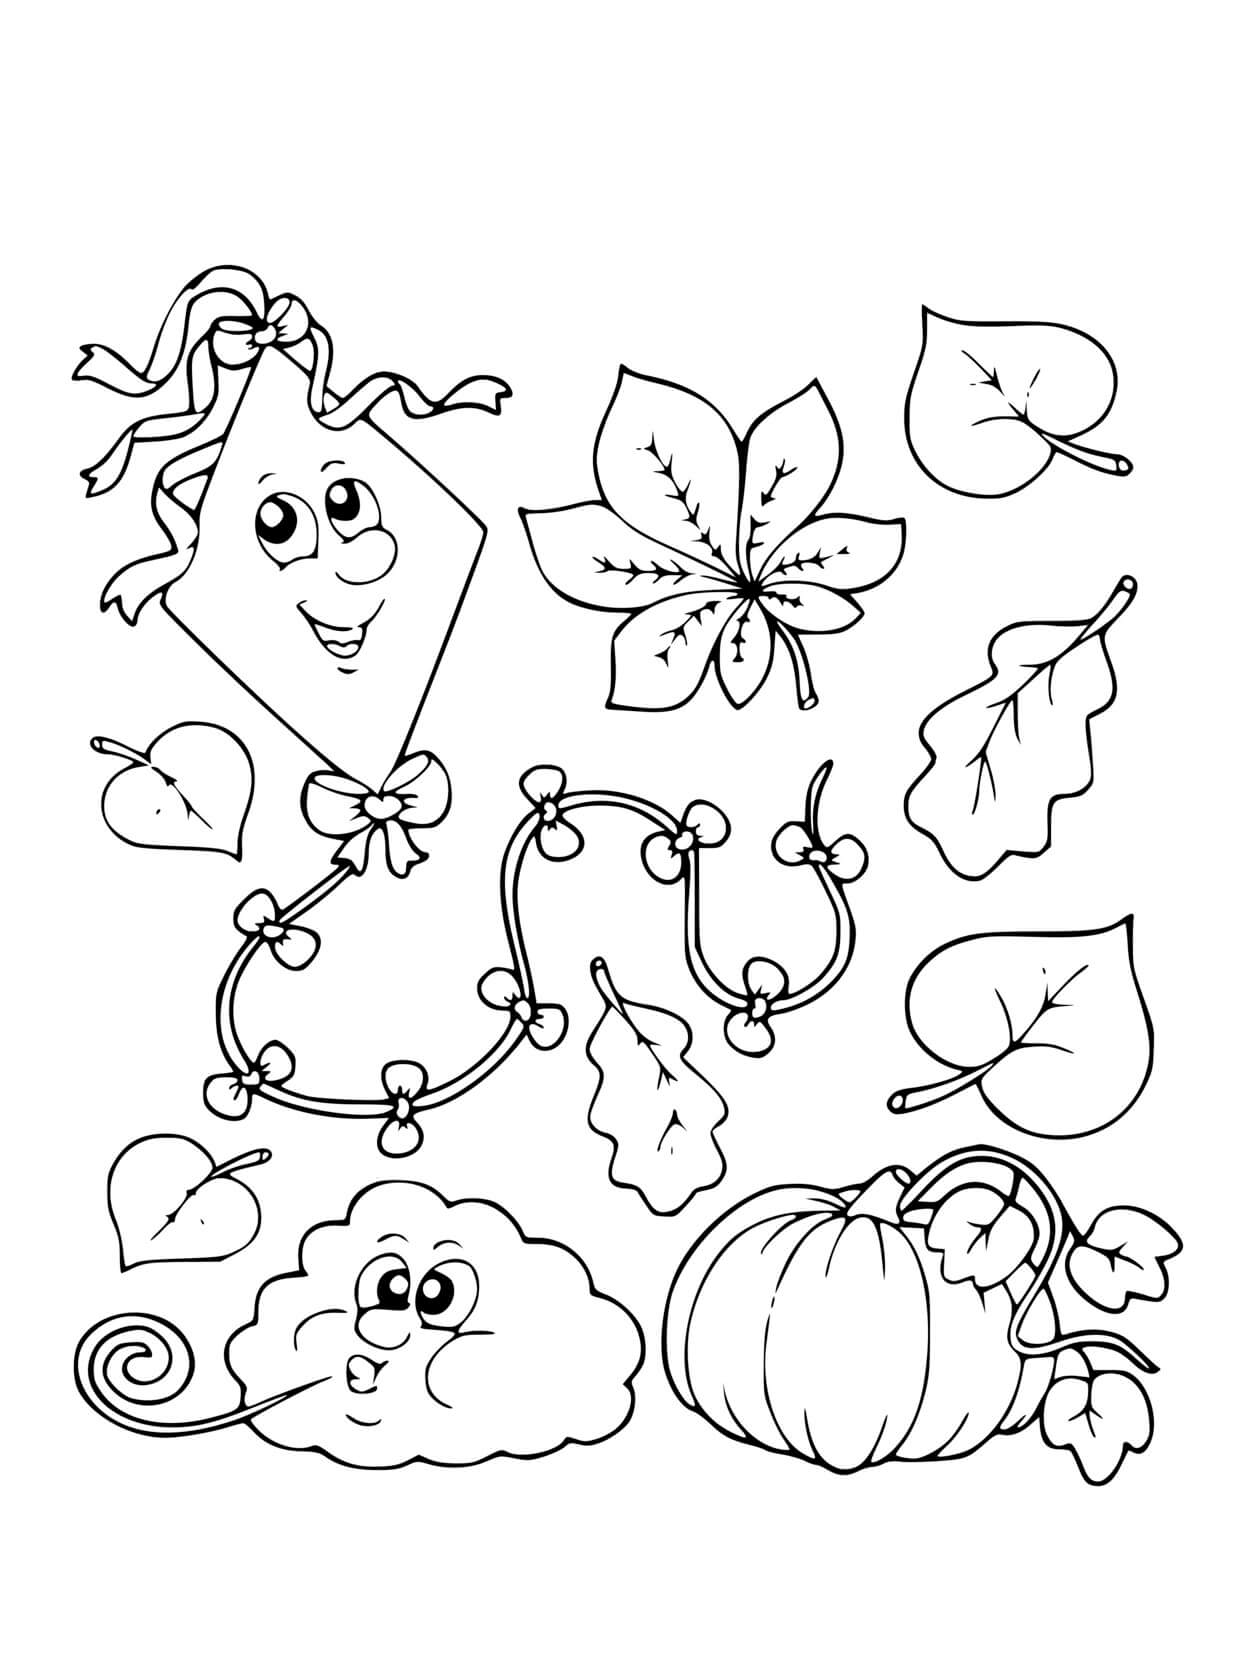 The Start Of Autumn Wind Pumpkin And Leaves Coloring Page